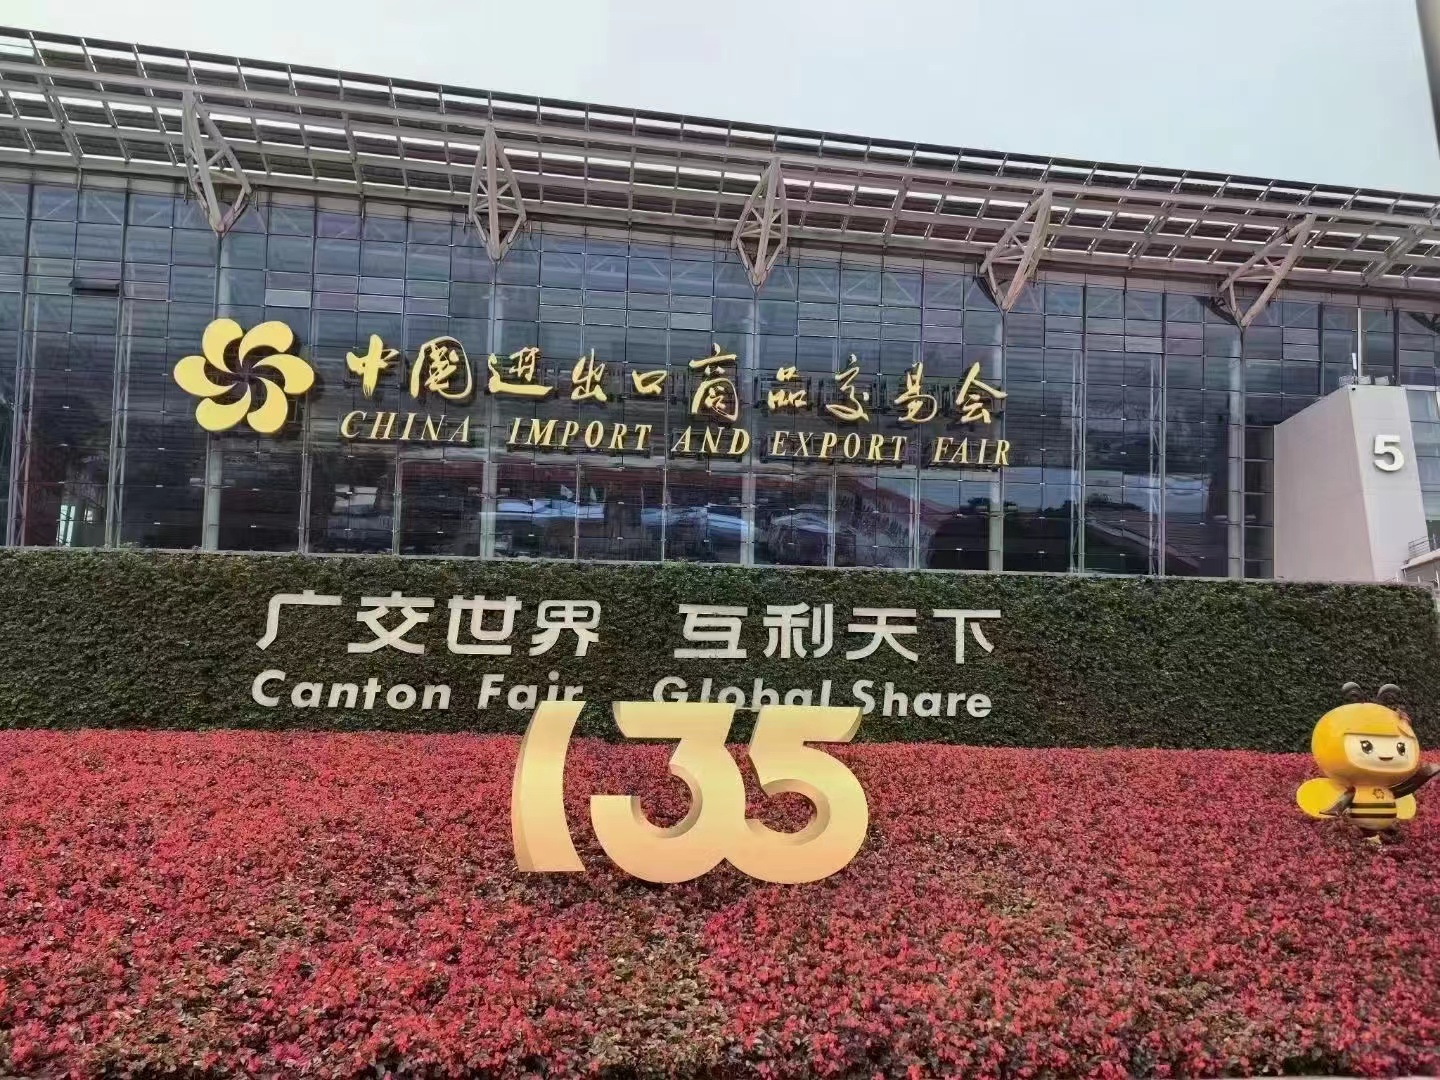 Welcome to the 135th Canton Fair and look forward to meeting you in Guangzhou